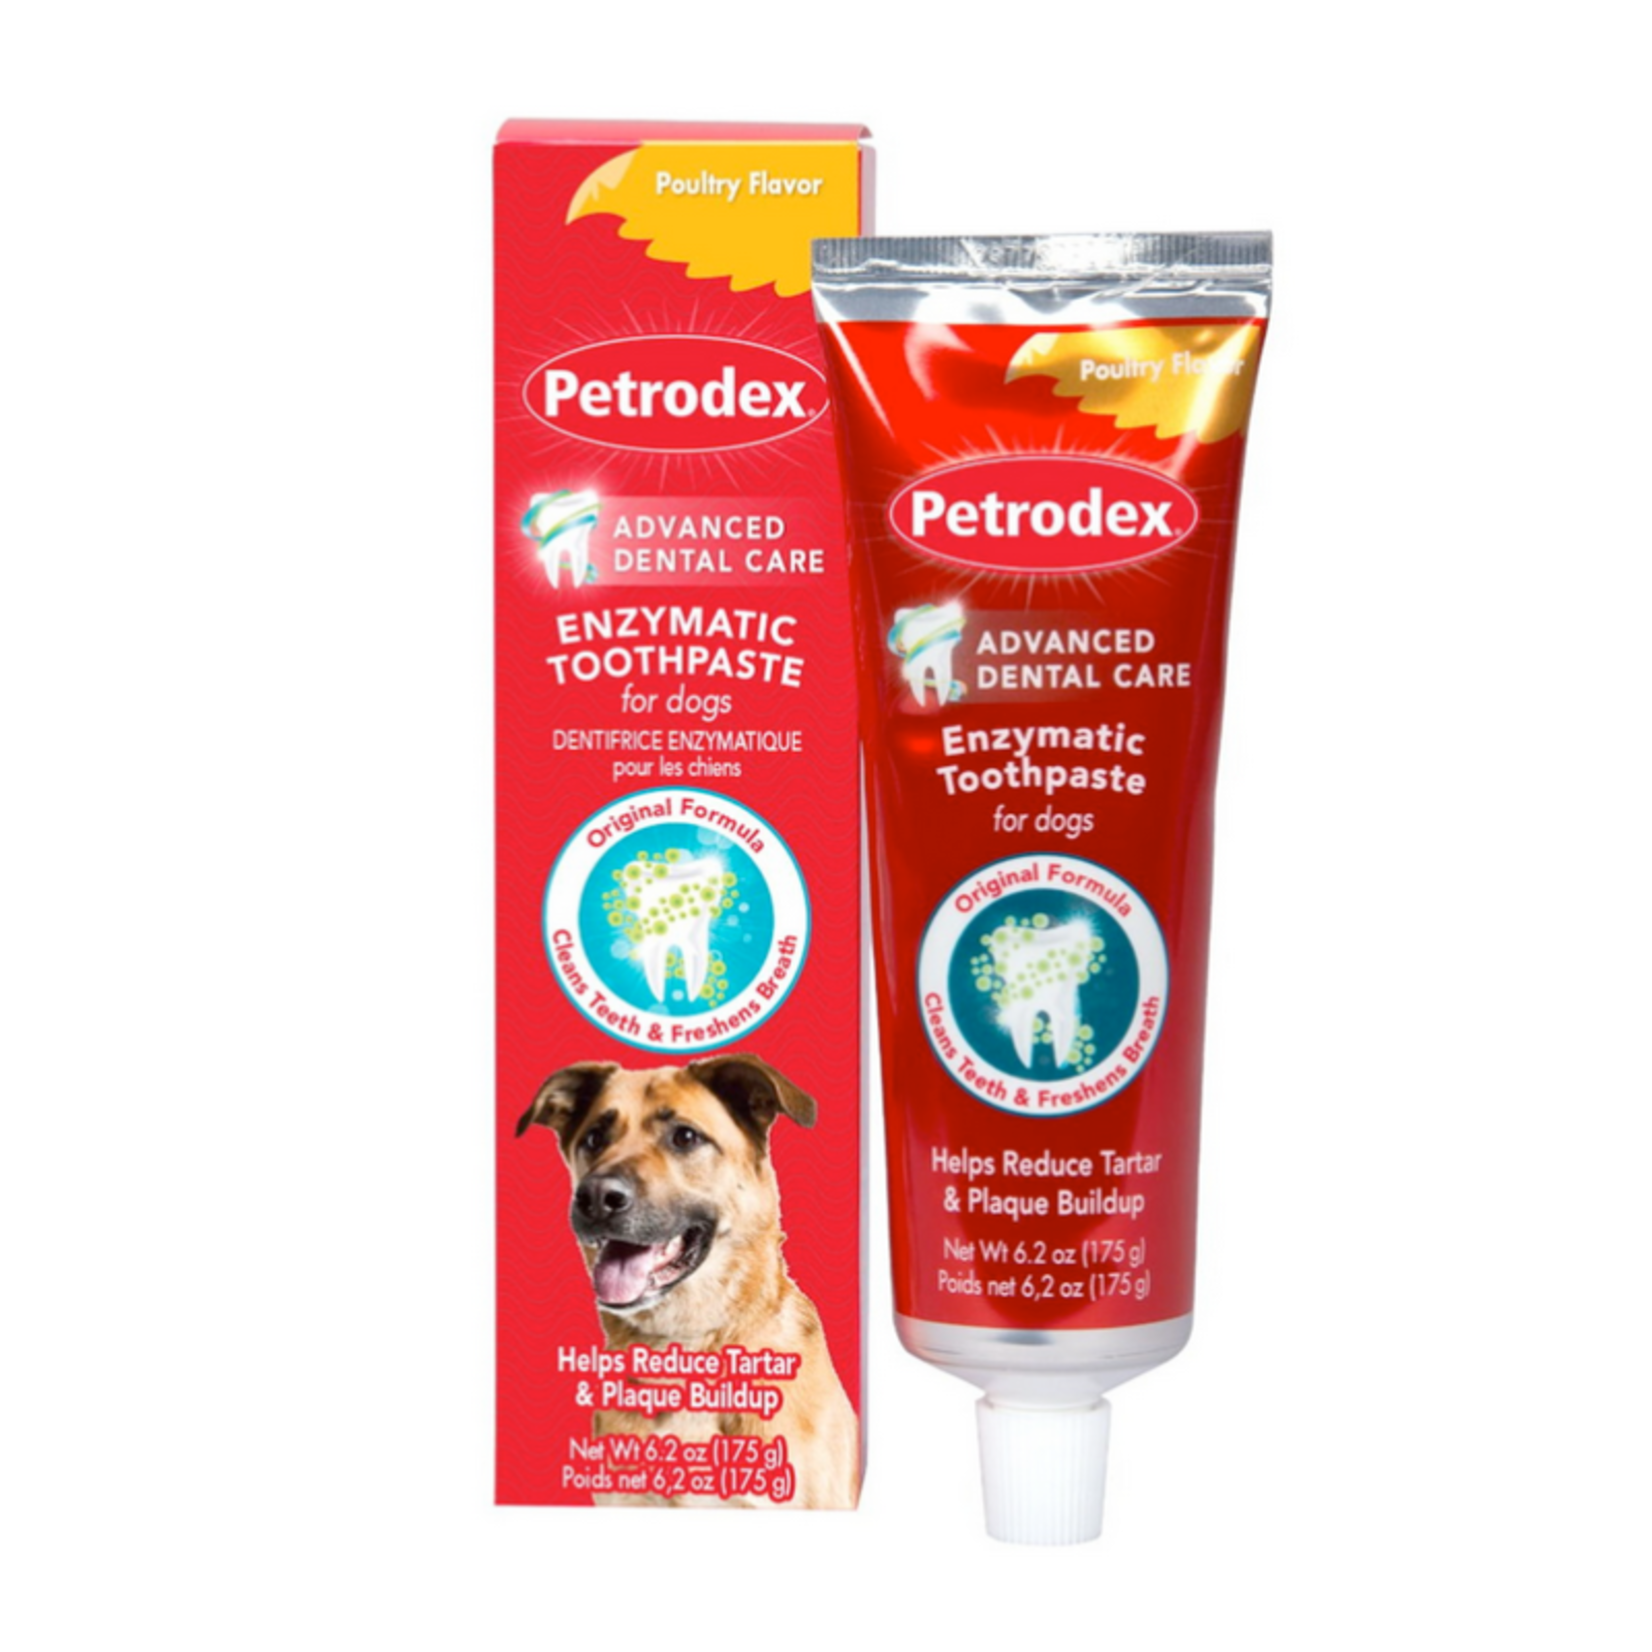 Poultry Flavor - Enzymatic Toothpaste for Dogs - Petrodex